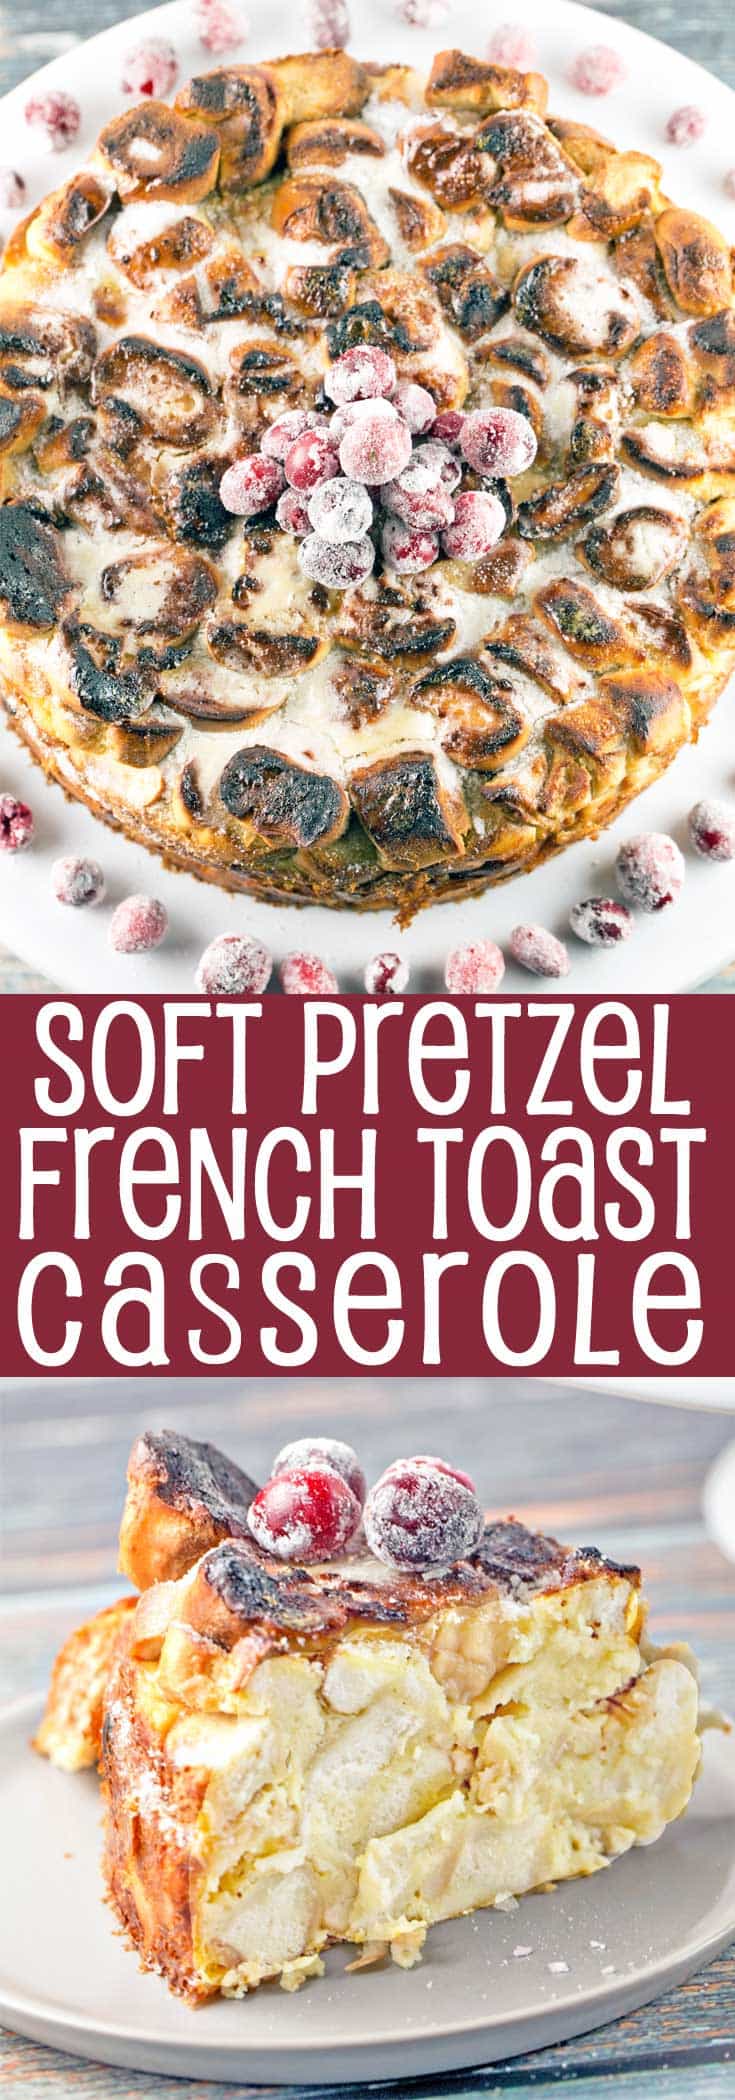 Soft Pretzel French Toast Casserole: sweet and salty, crunchy and soft, with a melted sugar crust. Perfect make-ahead breakfast for company! {Bunsen Burner Bakery}